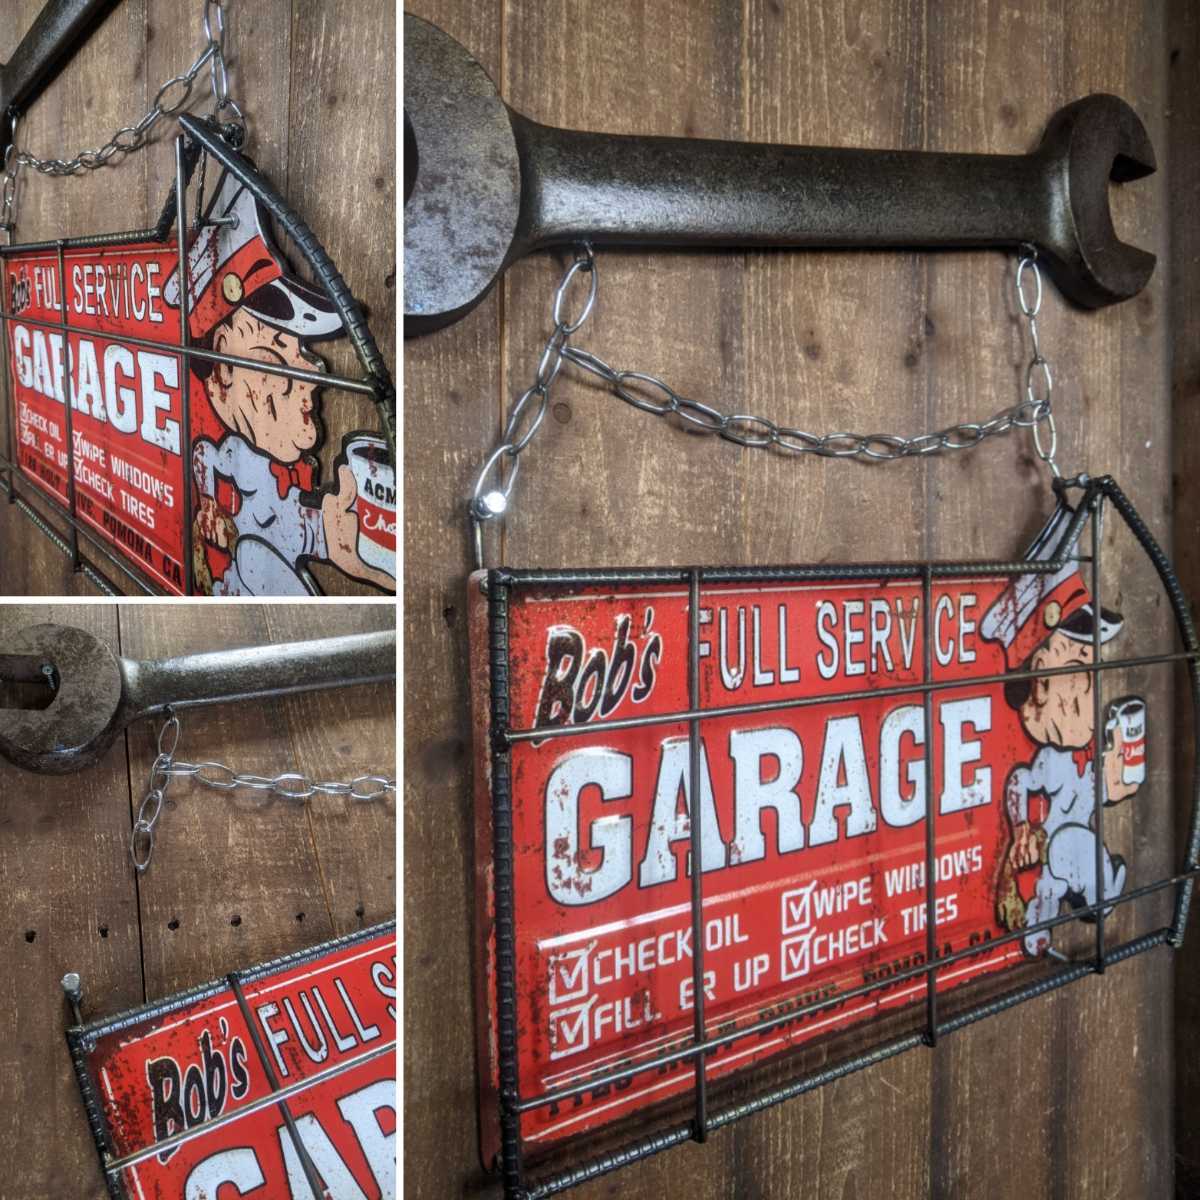  garage shop autograph board ornament signboard spanner wrench TOOL # garage life # american Vintage . house # american interior 